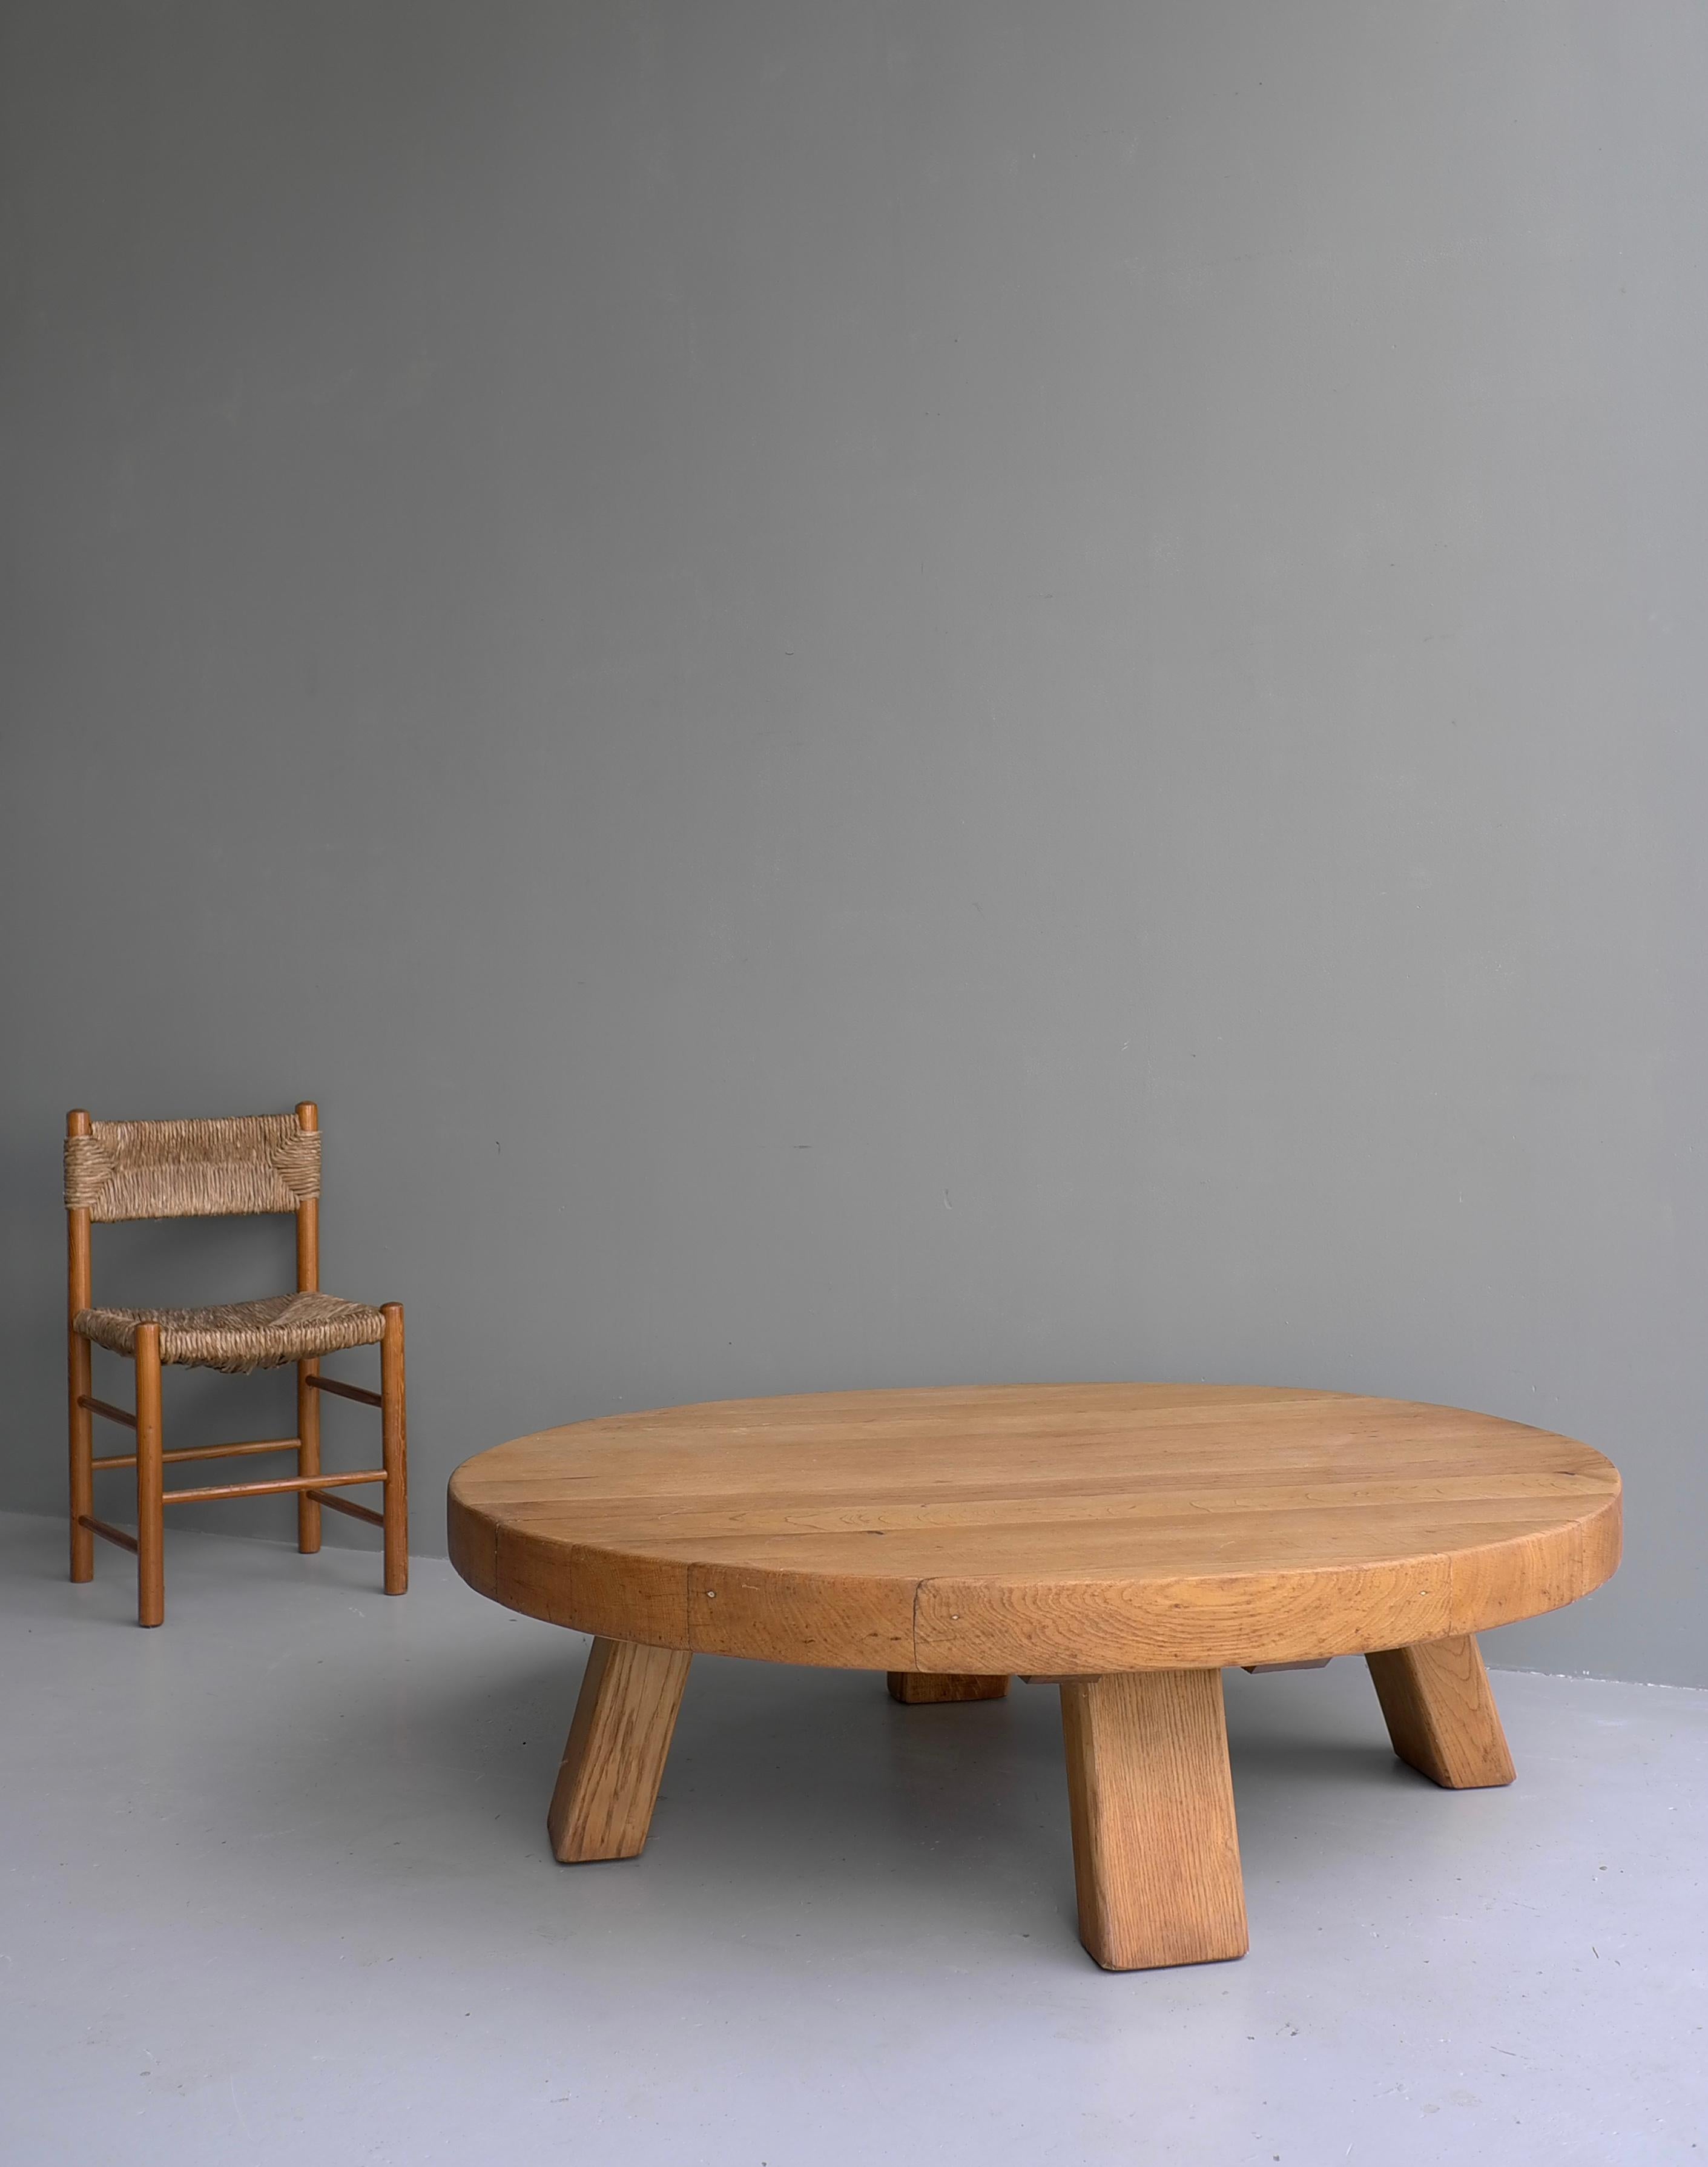 Large solid oak round coffee table in style of Charlotte Perriand, France, 1960s.